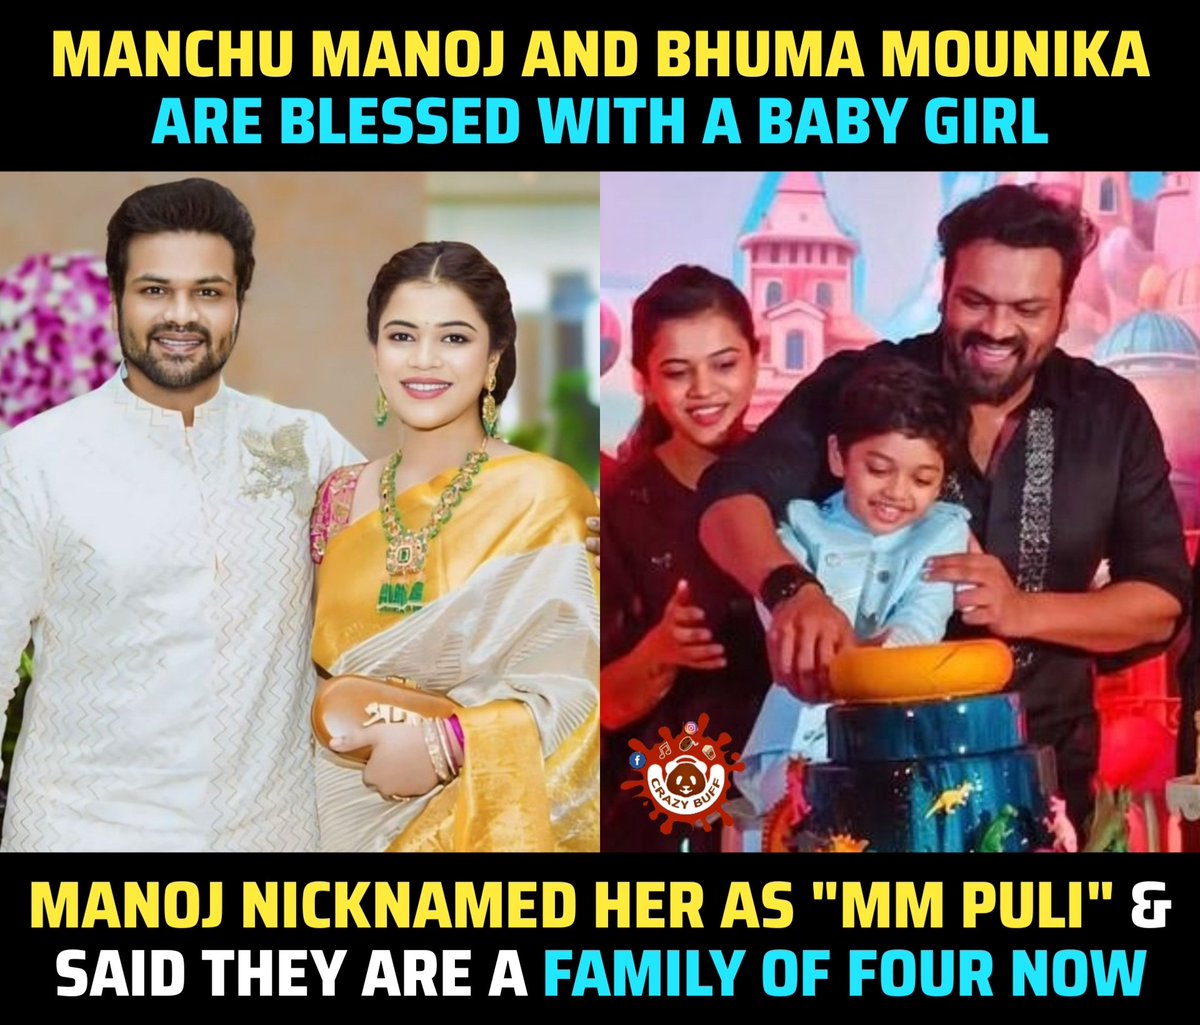 #ManchuManoj and #BhumaMounika are blessed with a baby girl!